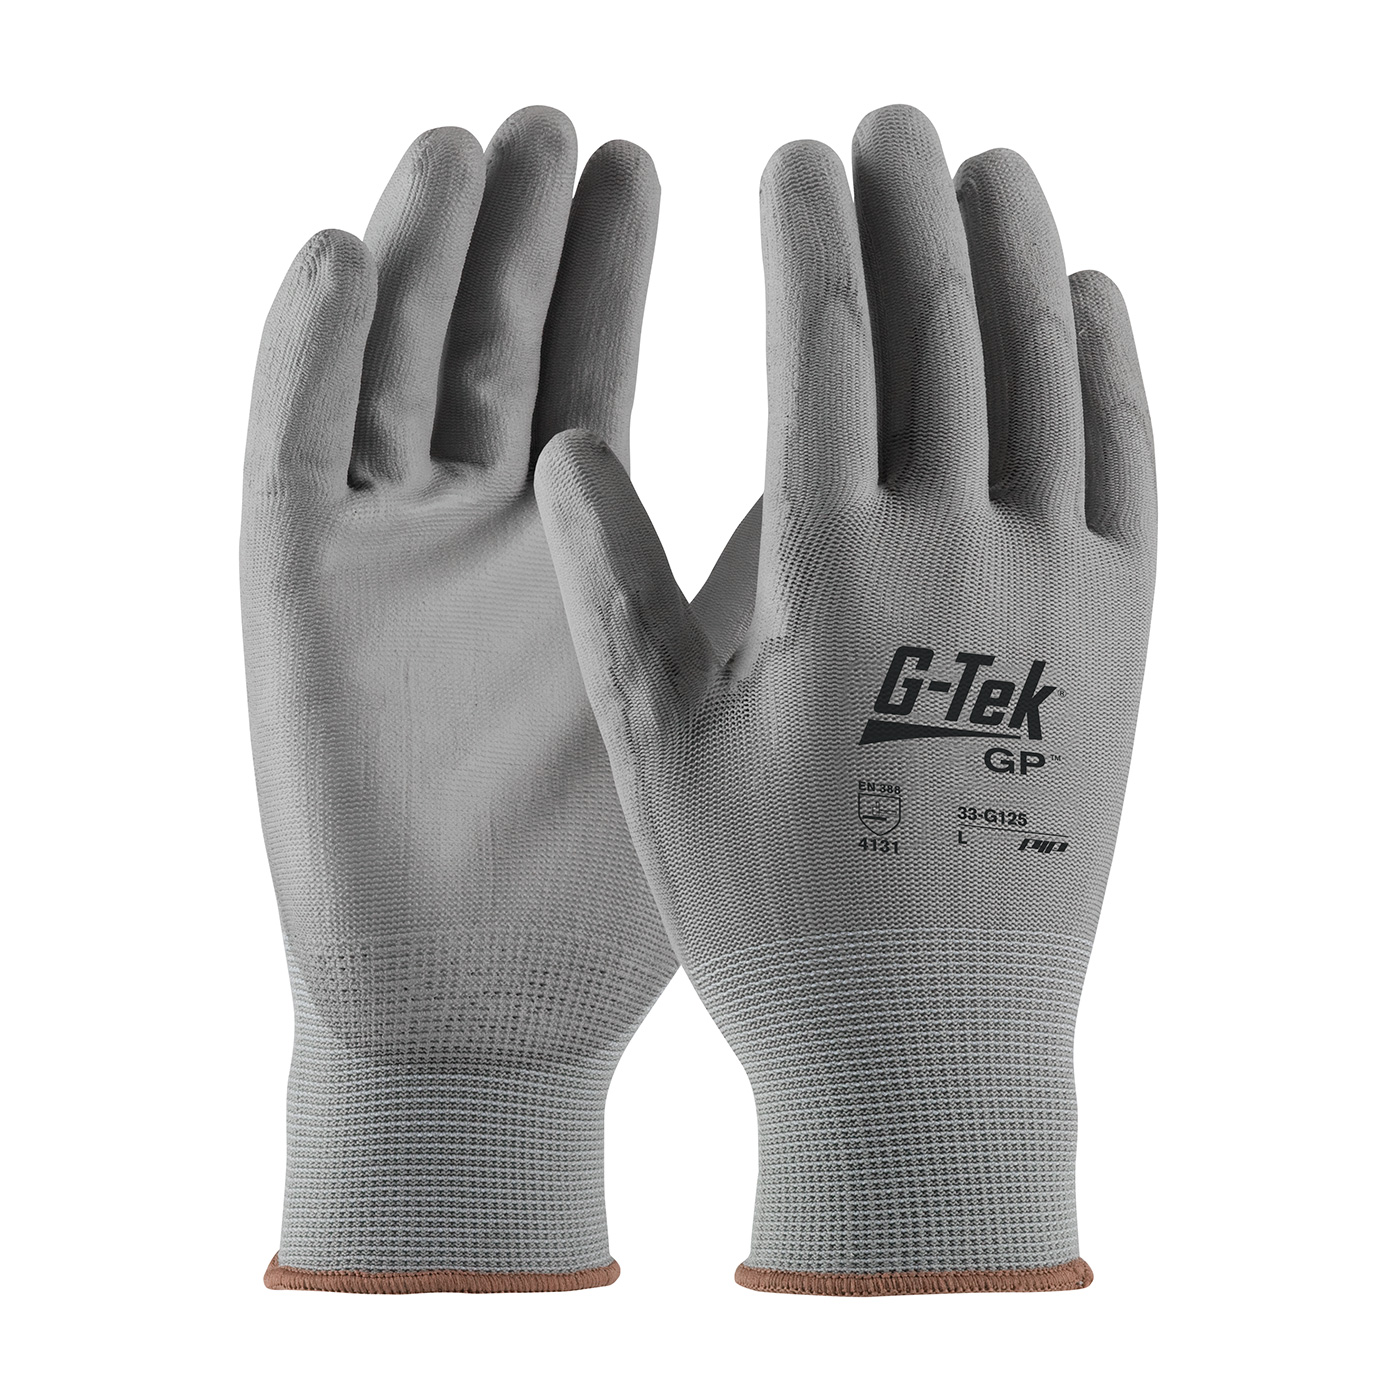 PIP 33-G125/S G-Tek GP Seamless Knit Nylon Glove with Polyurethane Coated Smooth Grip on Palm & Fingers - Small PID-33 G125 S